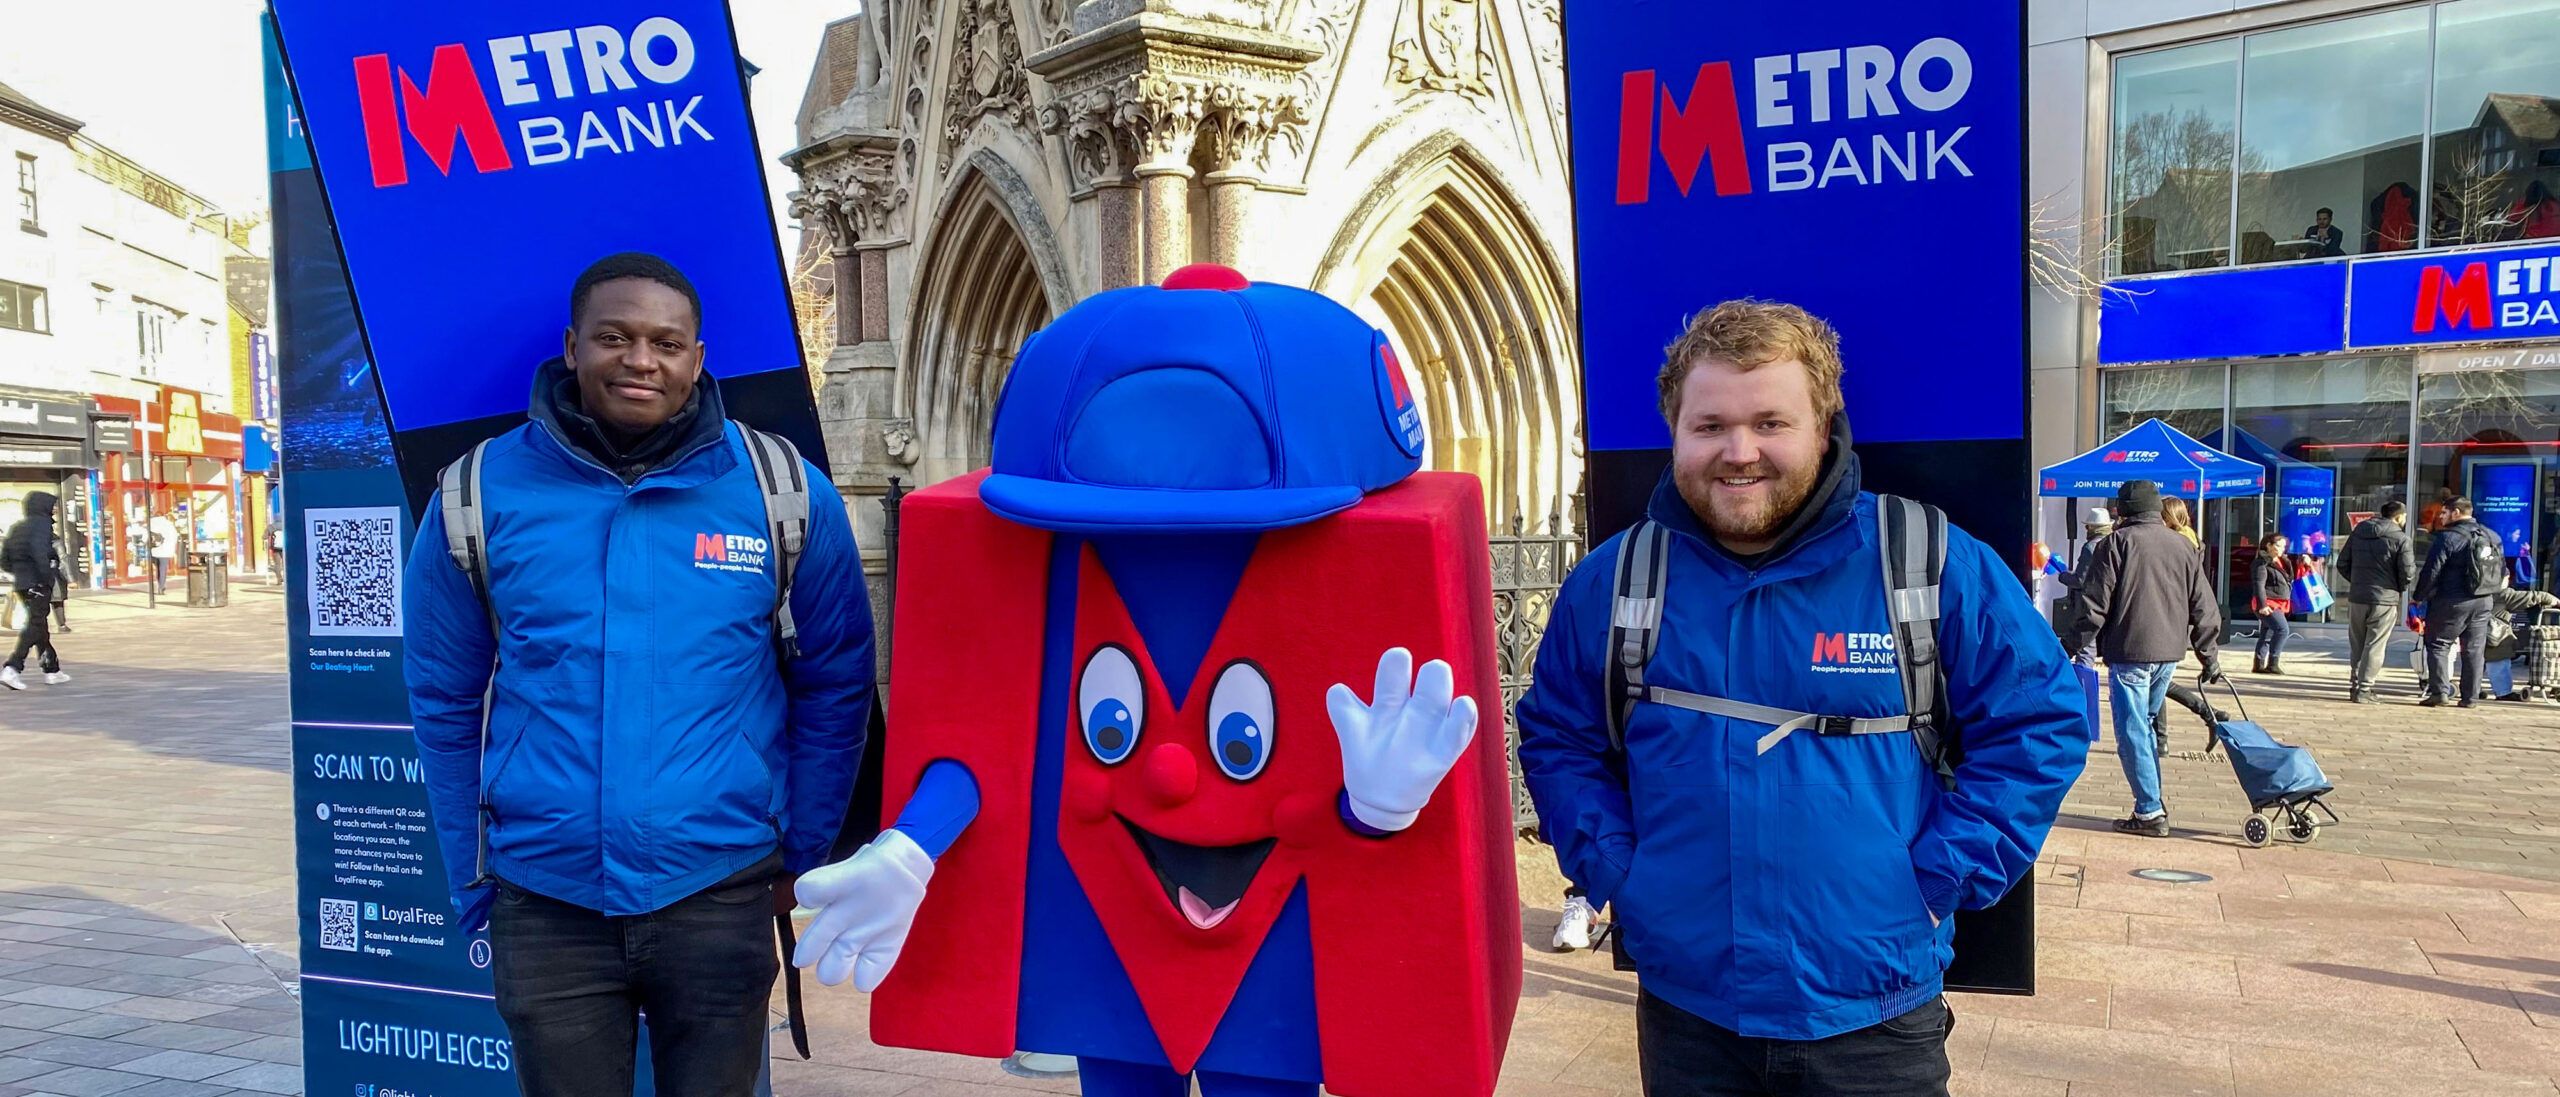 Metro Bank Promotional Staff on campaign in Leicester for resources